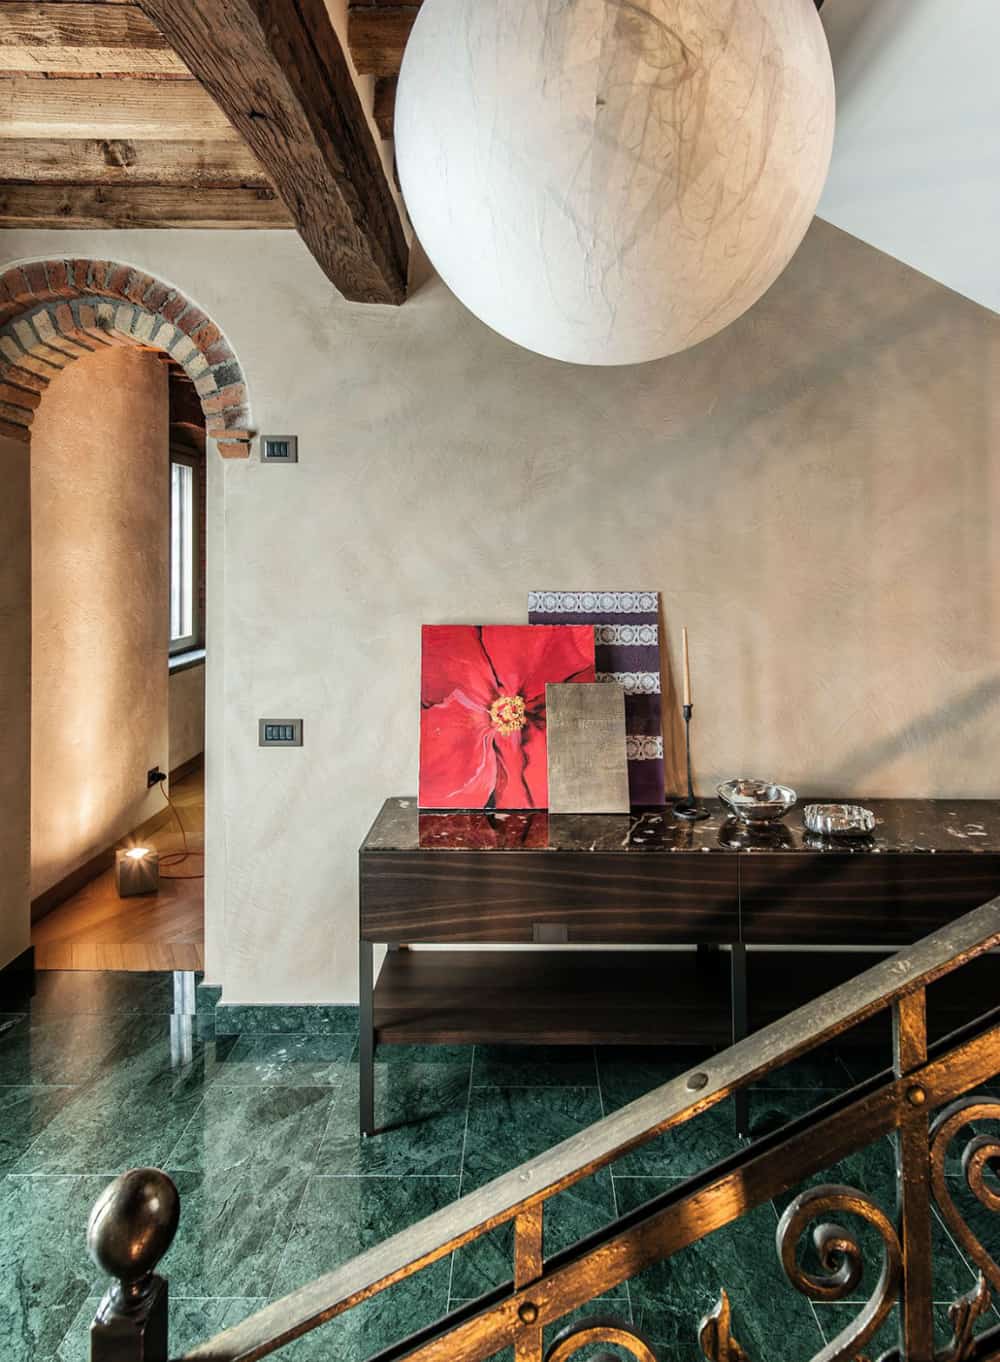 Foyer floors are covered with green marble tiles